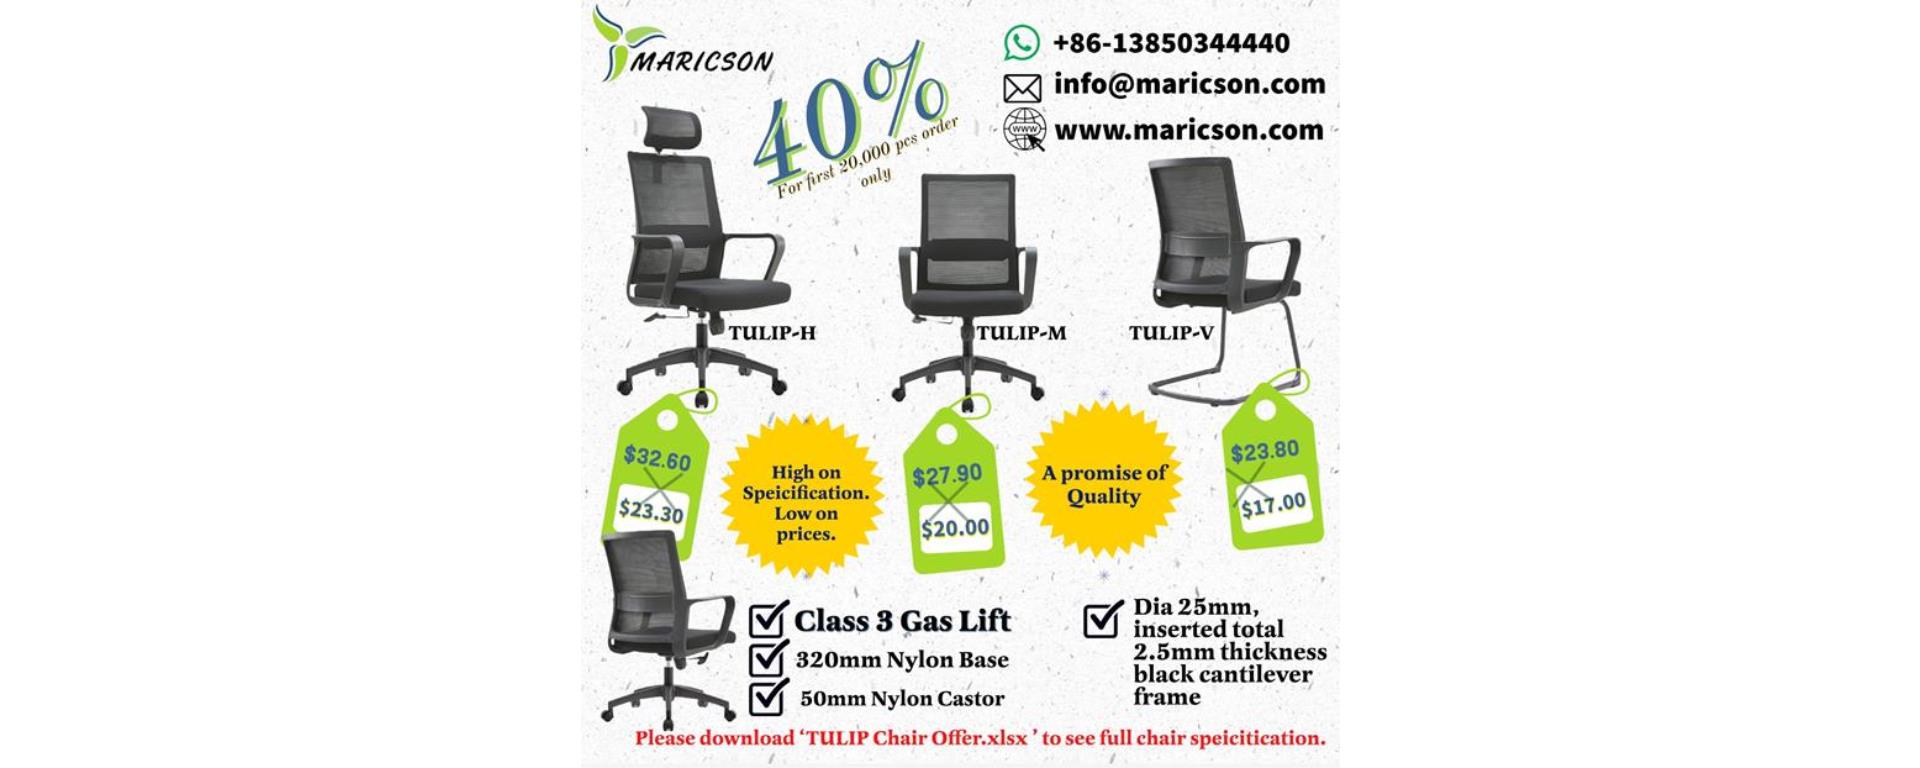 40% off on Tulip Chairs